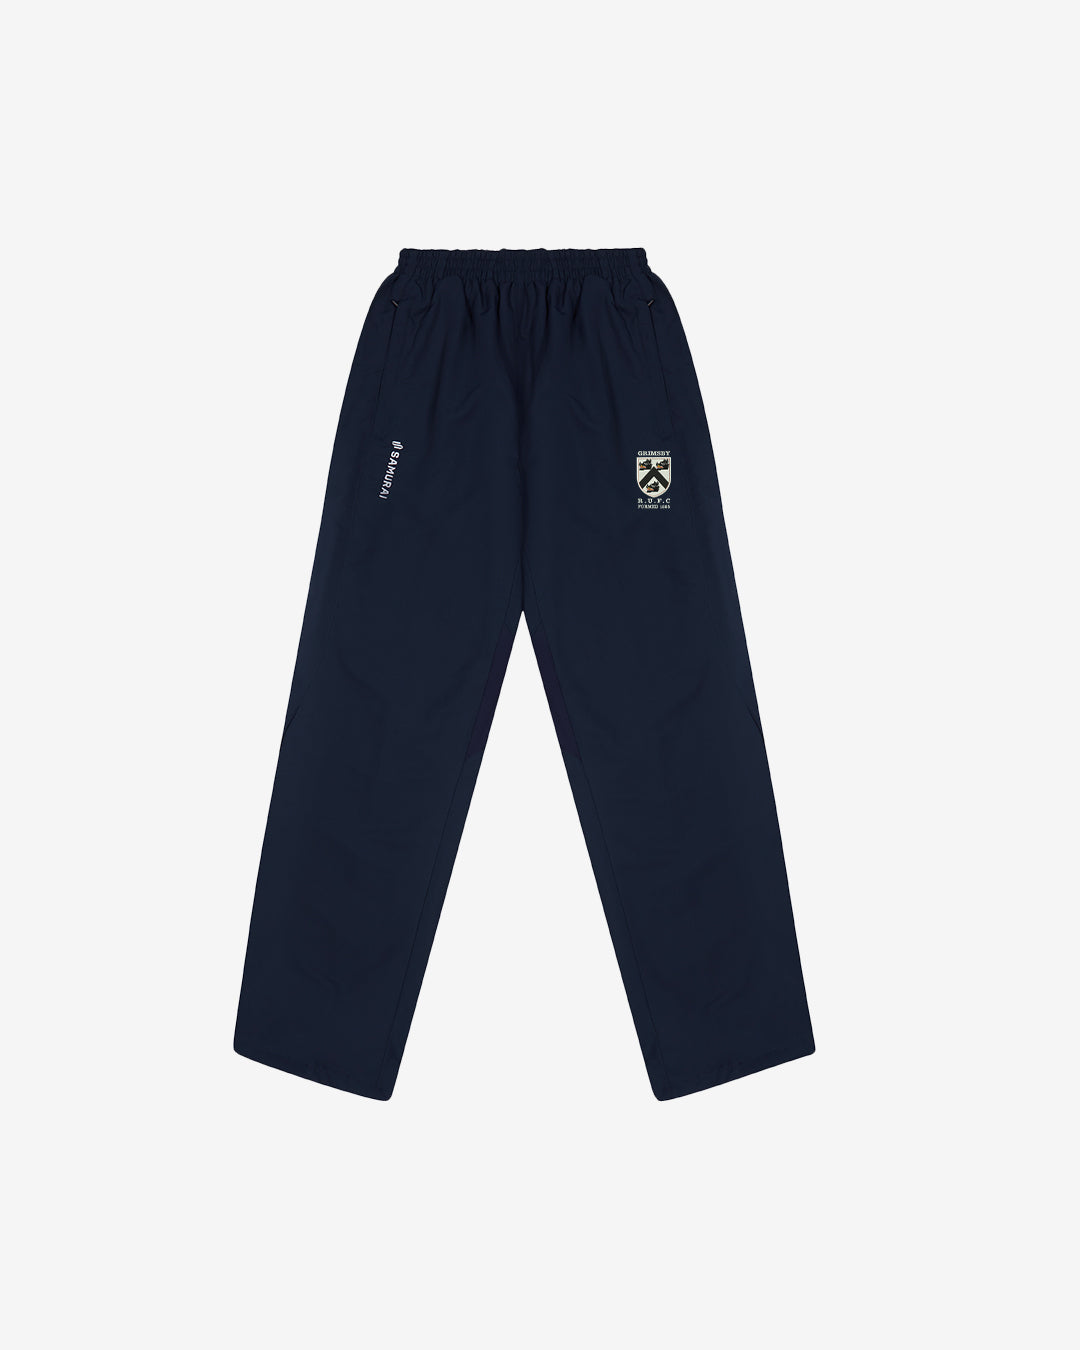 Grimsby RUFC - EP:0127 - Active Pant - Navy